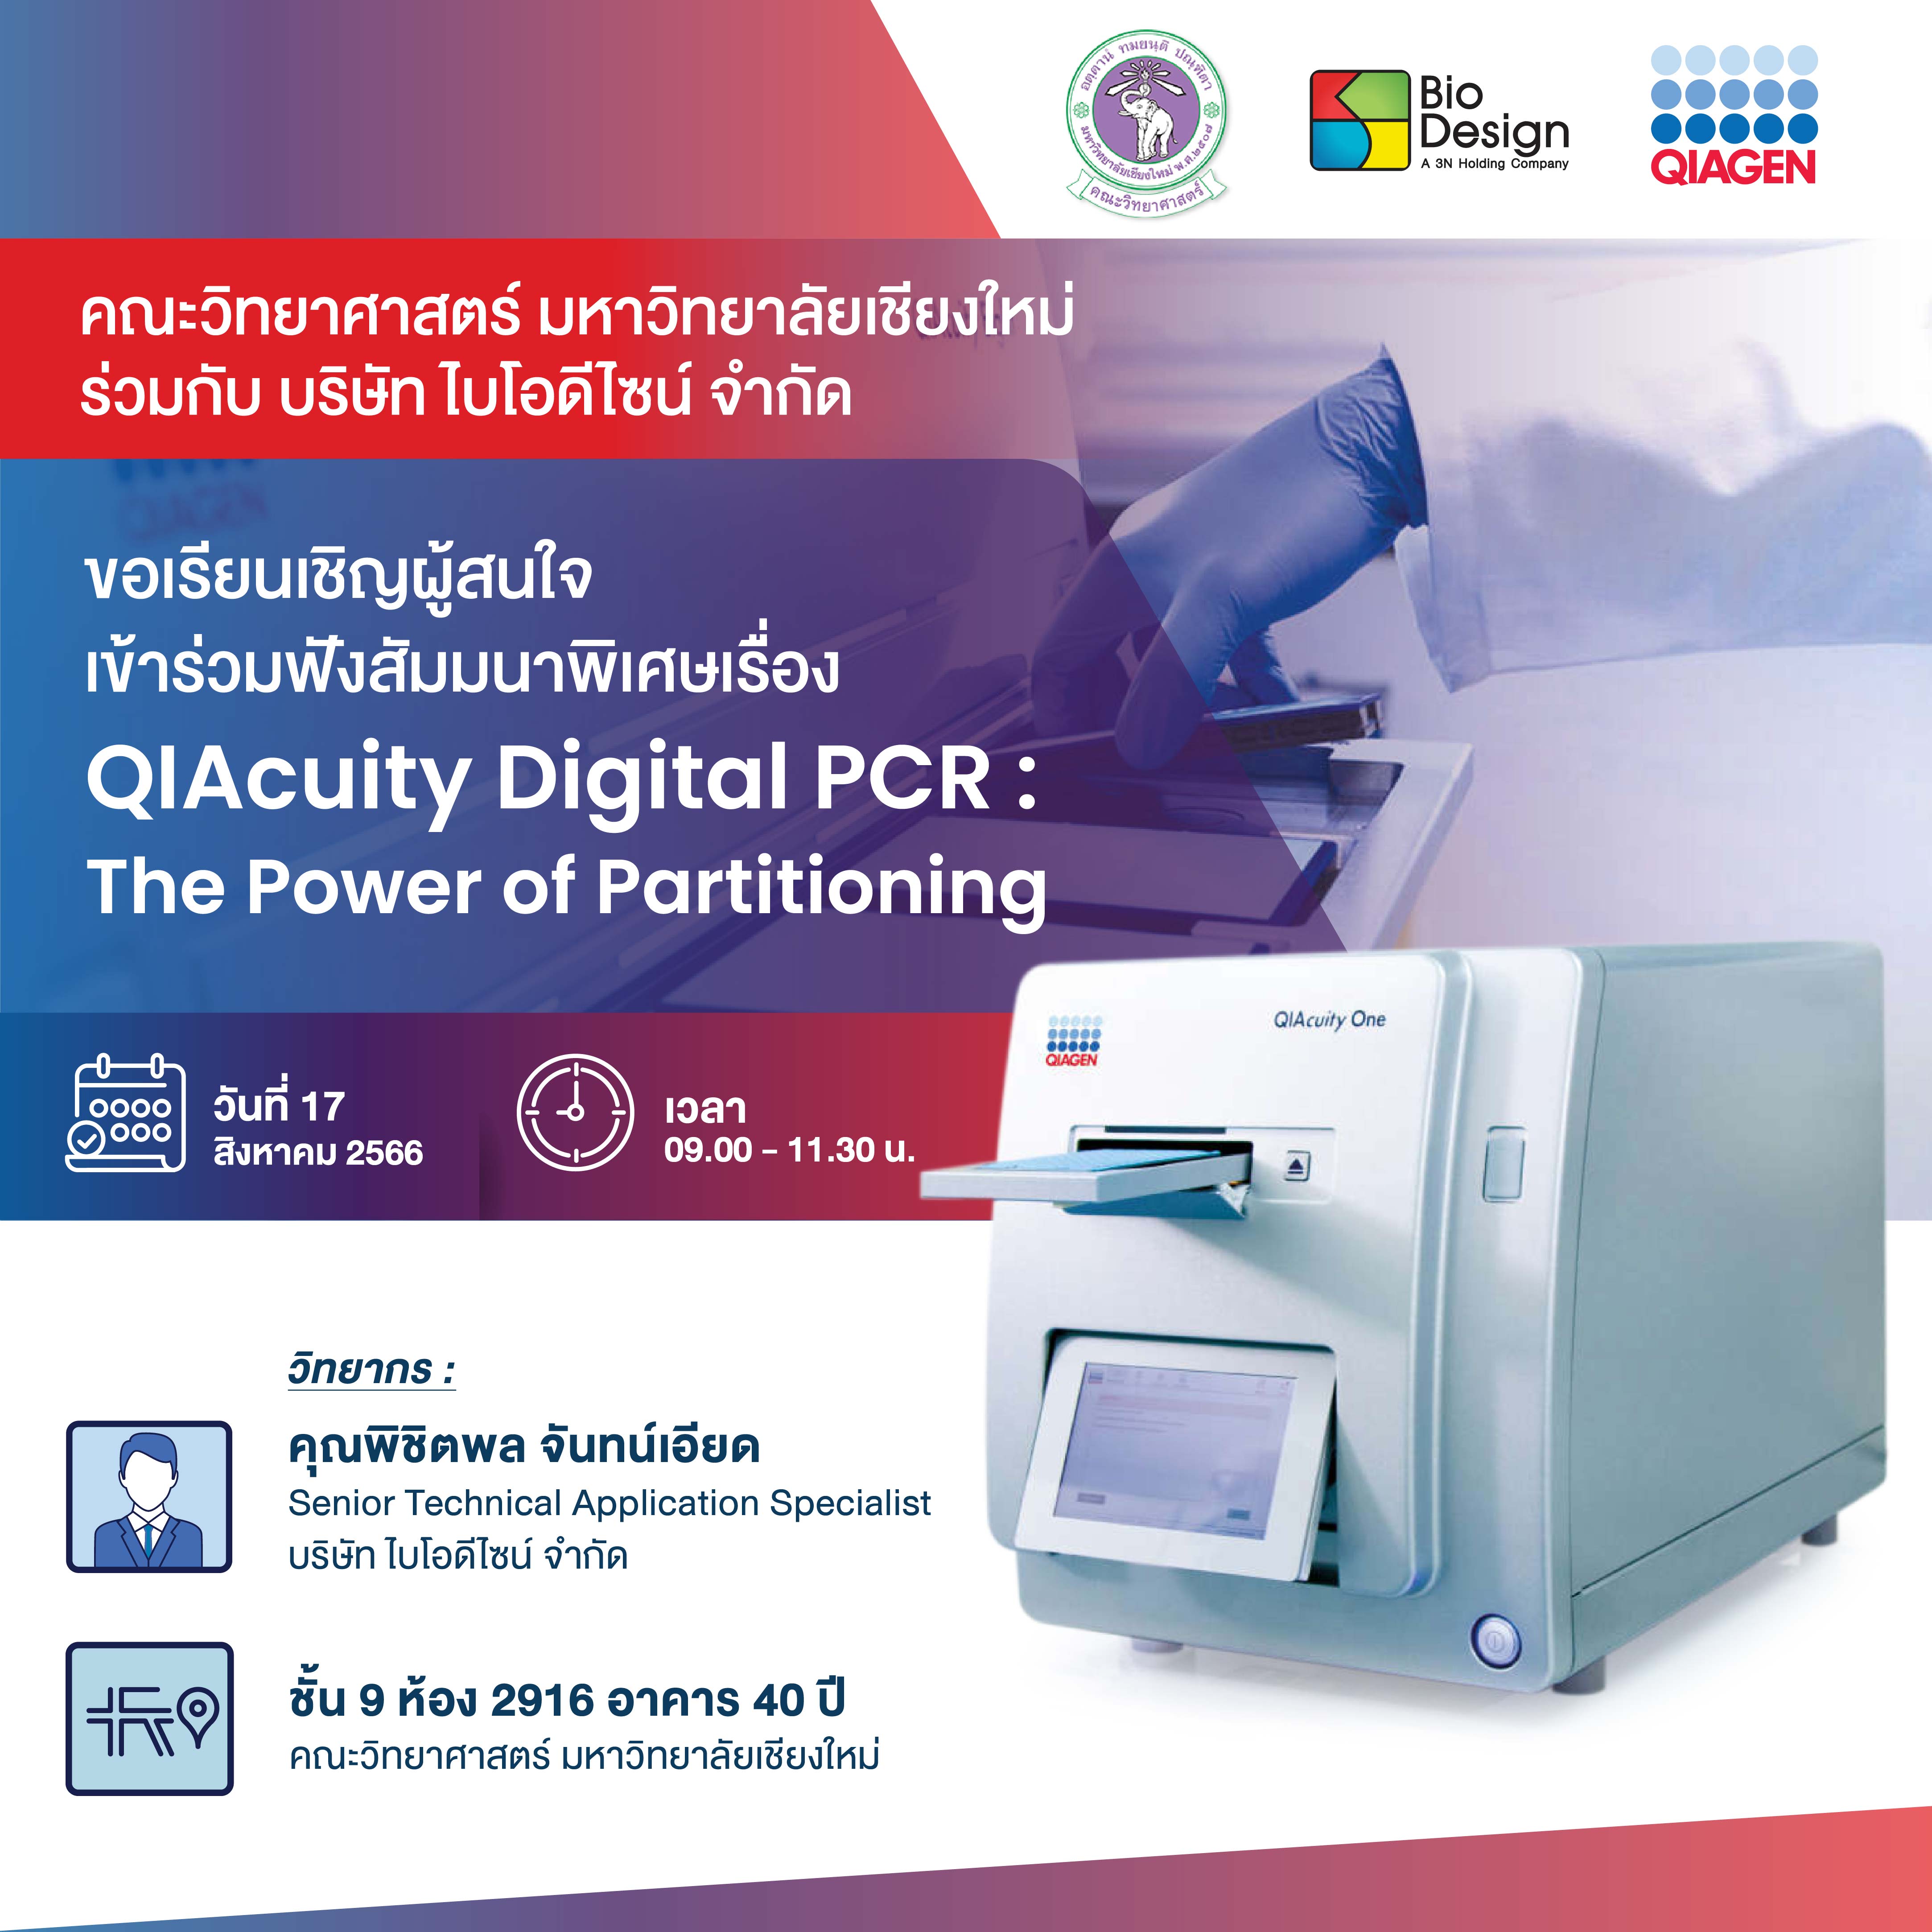 QIAcuity Digital PCR: The Power of Partitioning